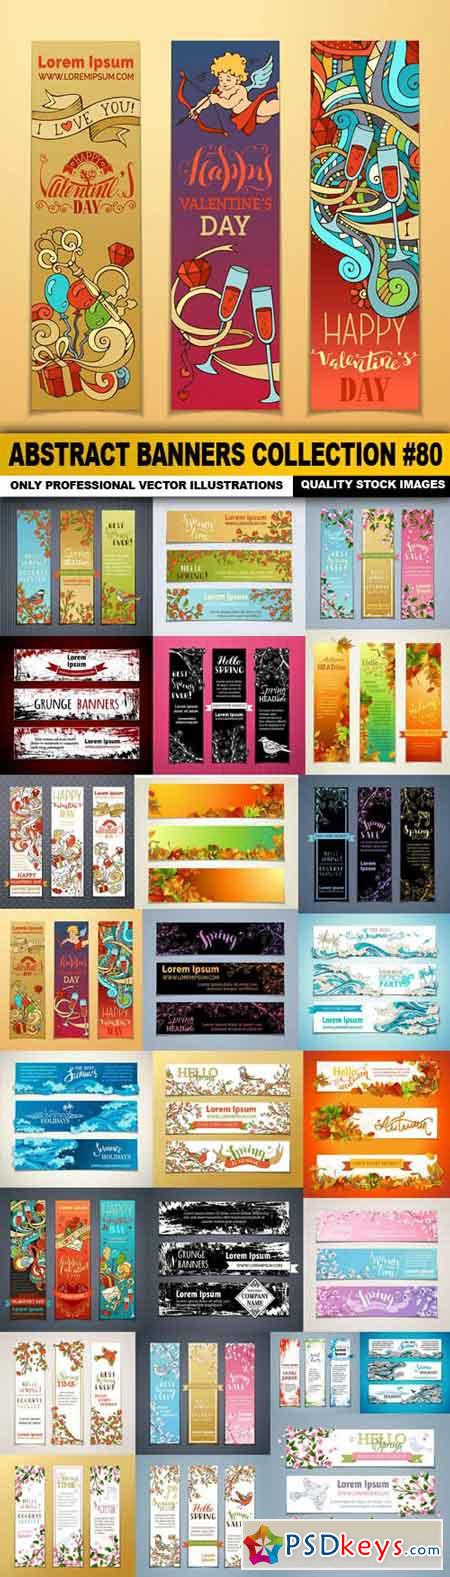 Abstract Banners Collection #80 - 25 Vectors